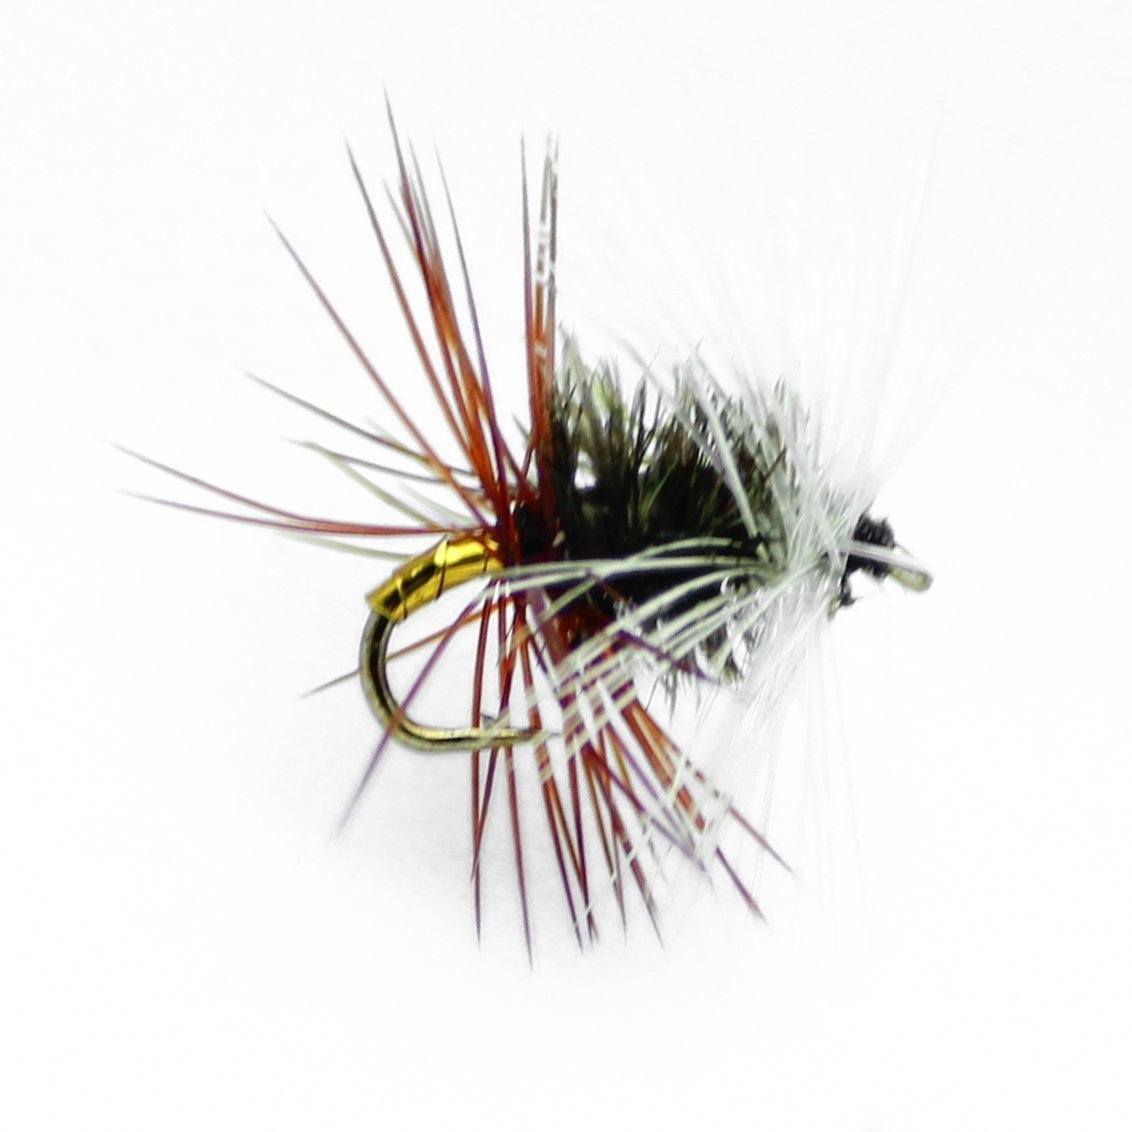 Feeder Creek Fly Fishing Dry Flies Assortment, 6 Patterns Renegade, Black  Gnat, Elk Hair Caddis Tan, Adams Parachute and More, Great for Trout 